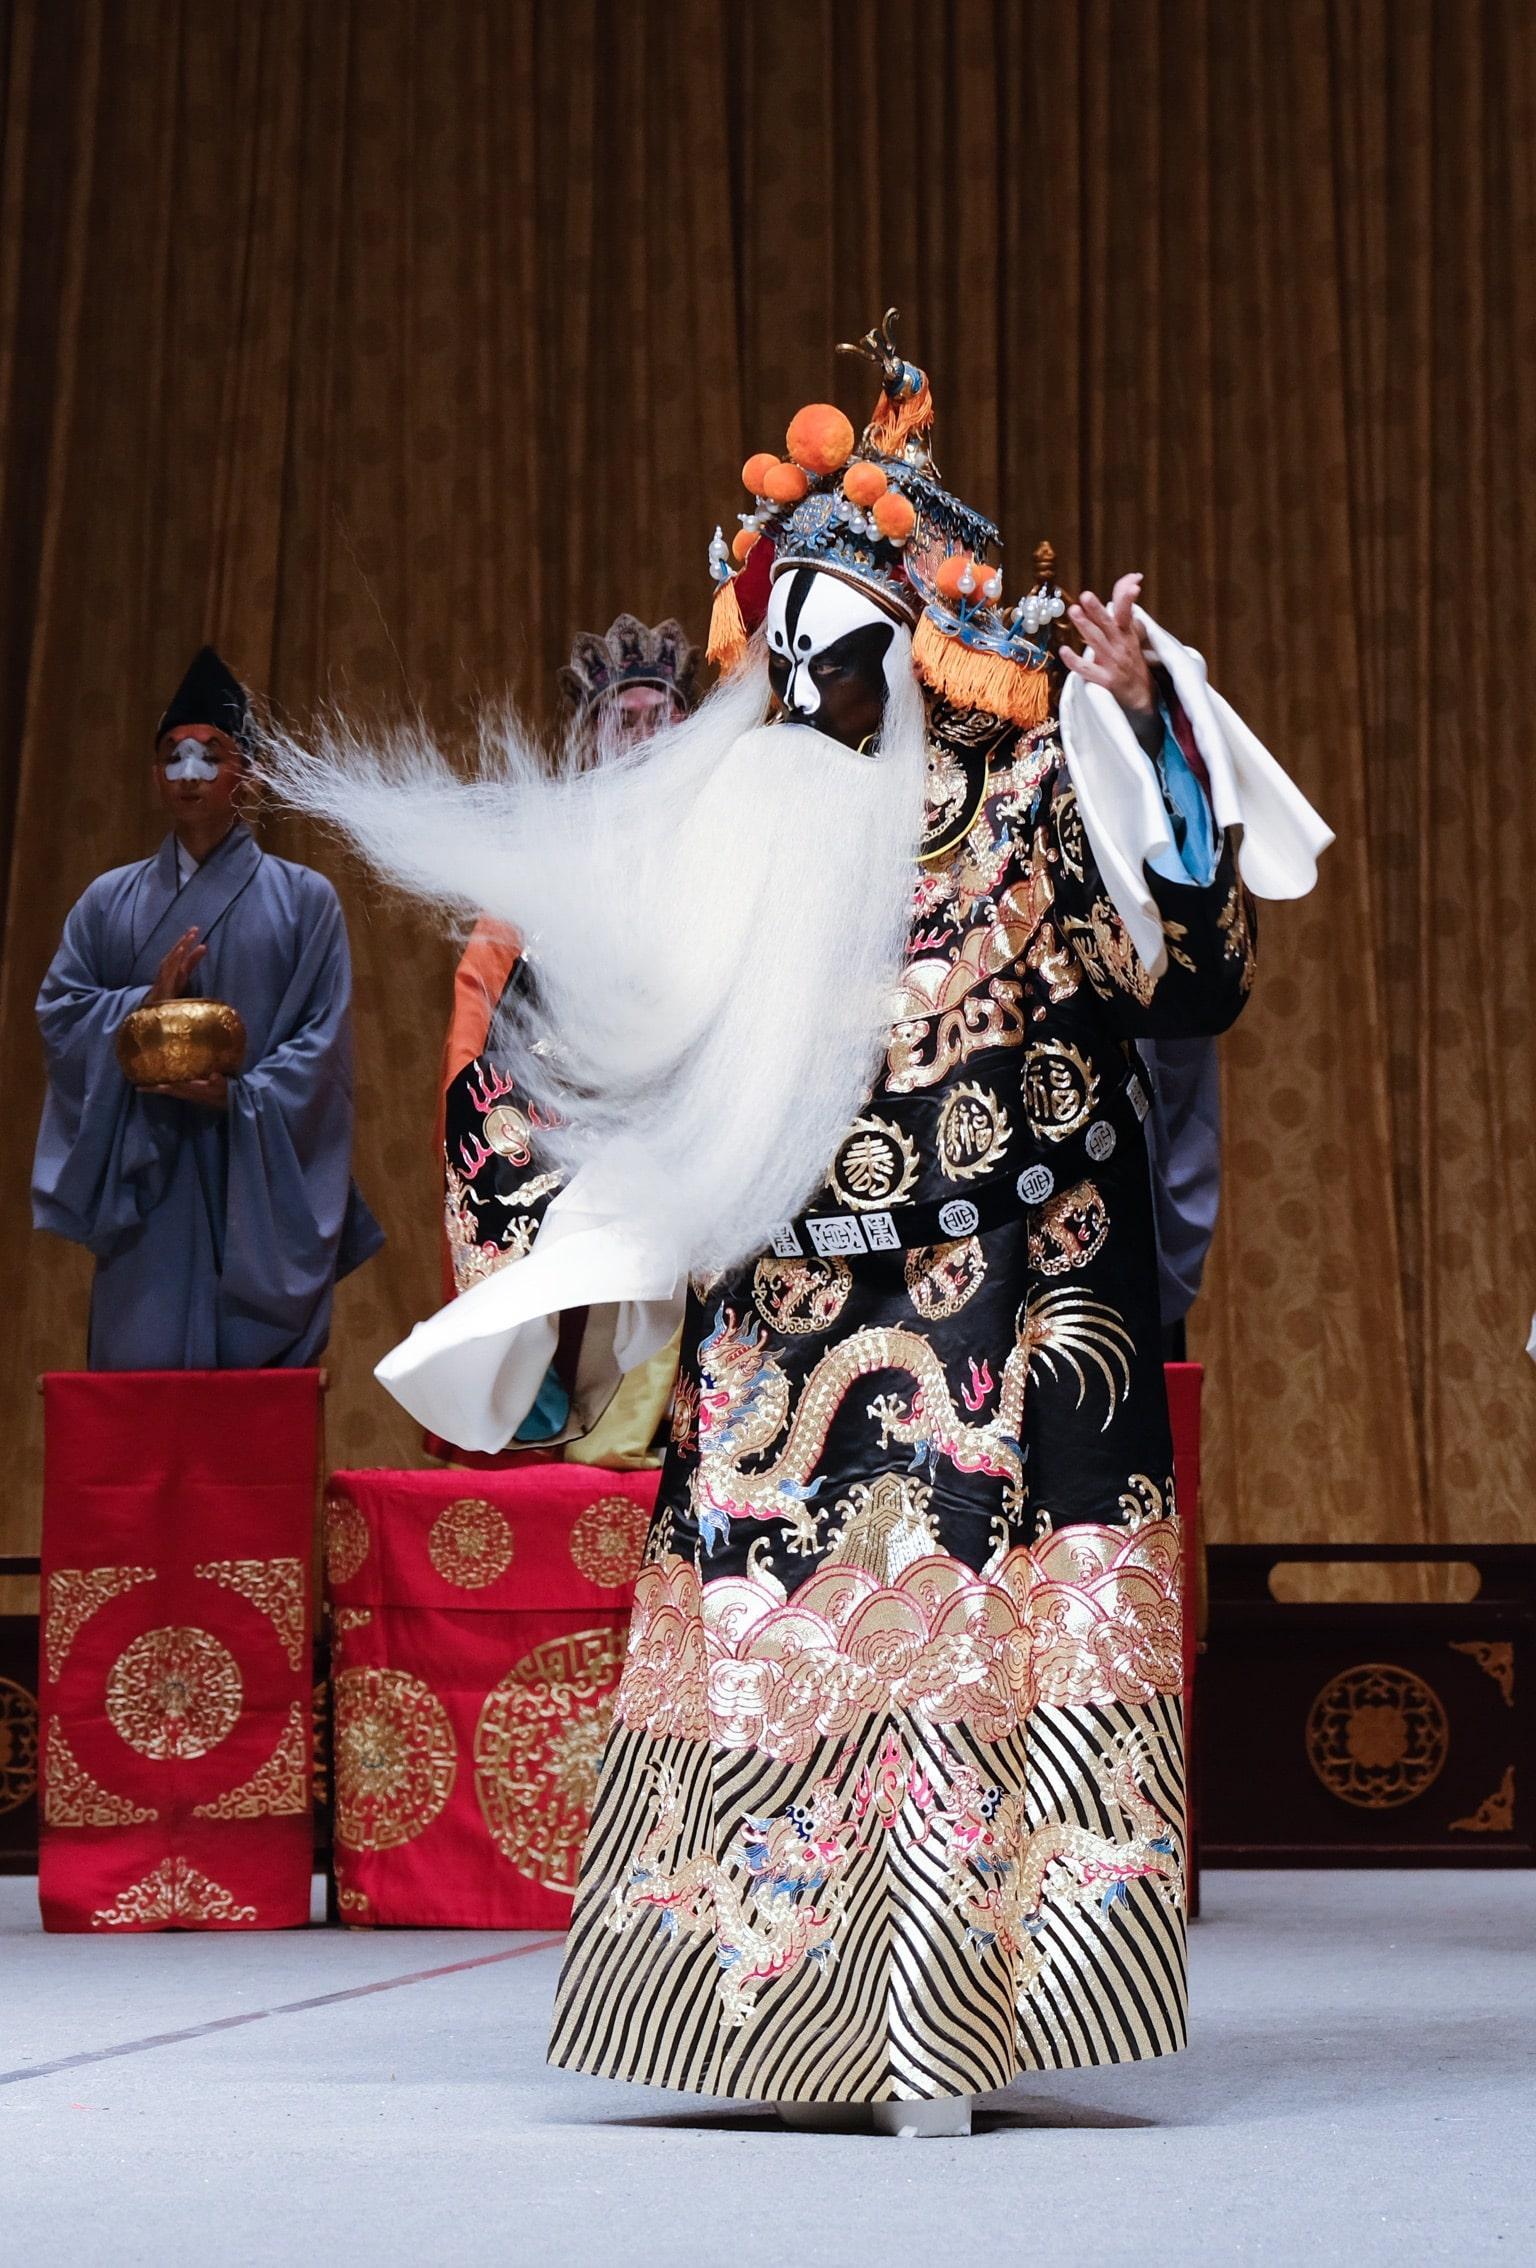 The inaugural Chinese Culture Festival will stage three classic Northern Kunqu opera plays in July. Photo shows a scene from the performance "A Farewell Feast" from the Qing Court opera "Shengping Baofa".
